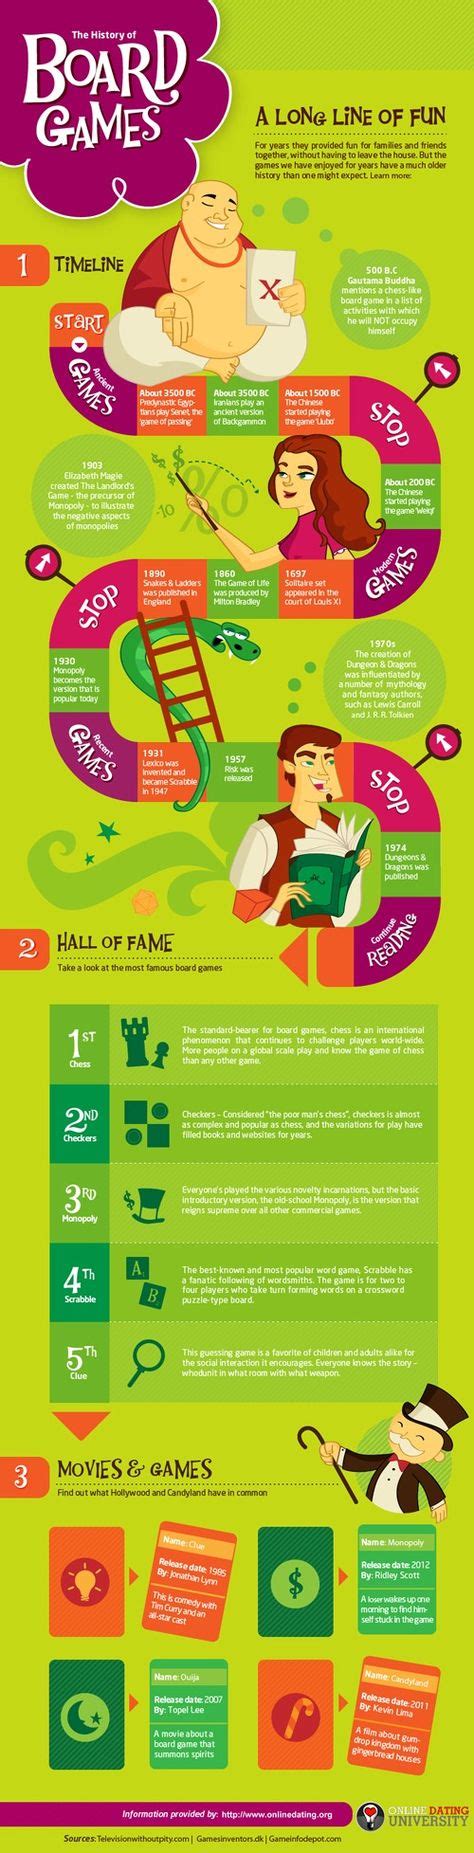 13 Best Gaming Infographics Images Infographic Games Social Games